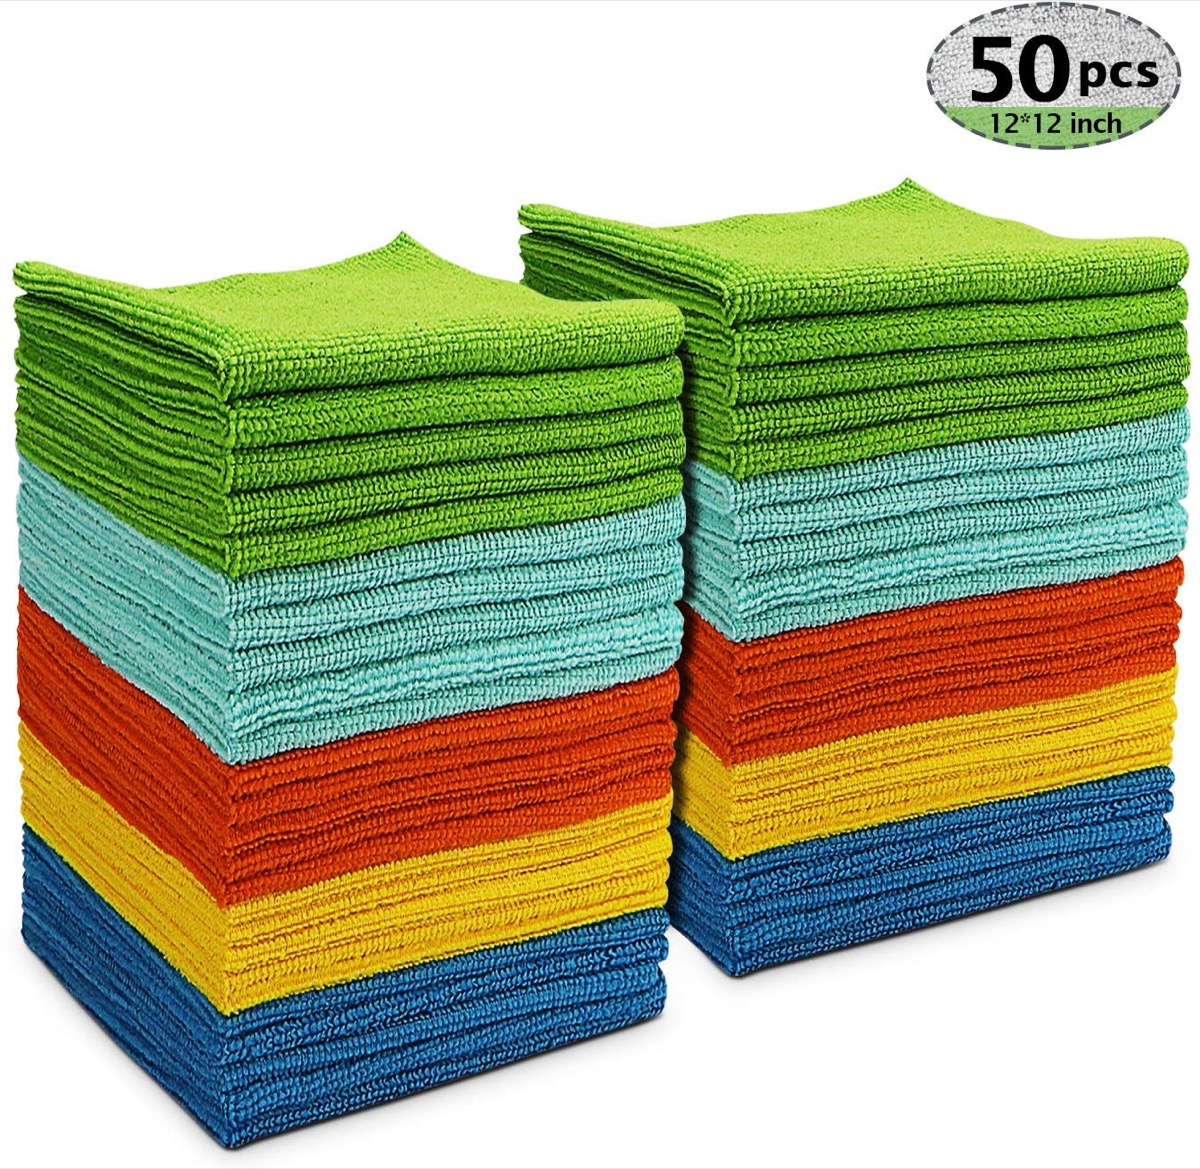 50 pack of colorful towels